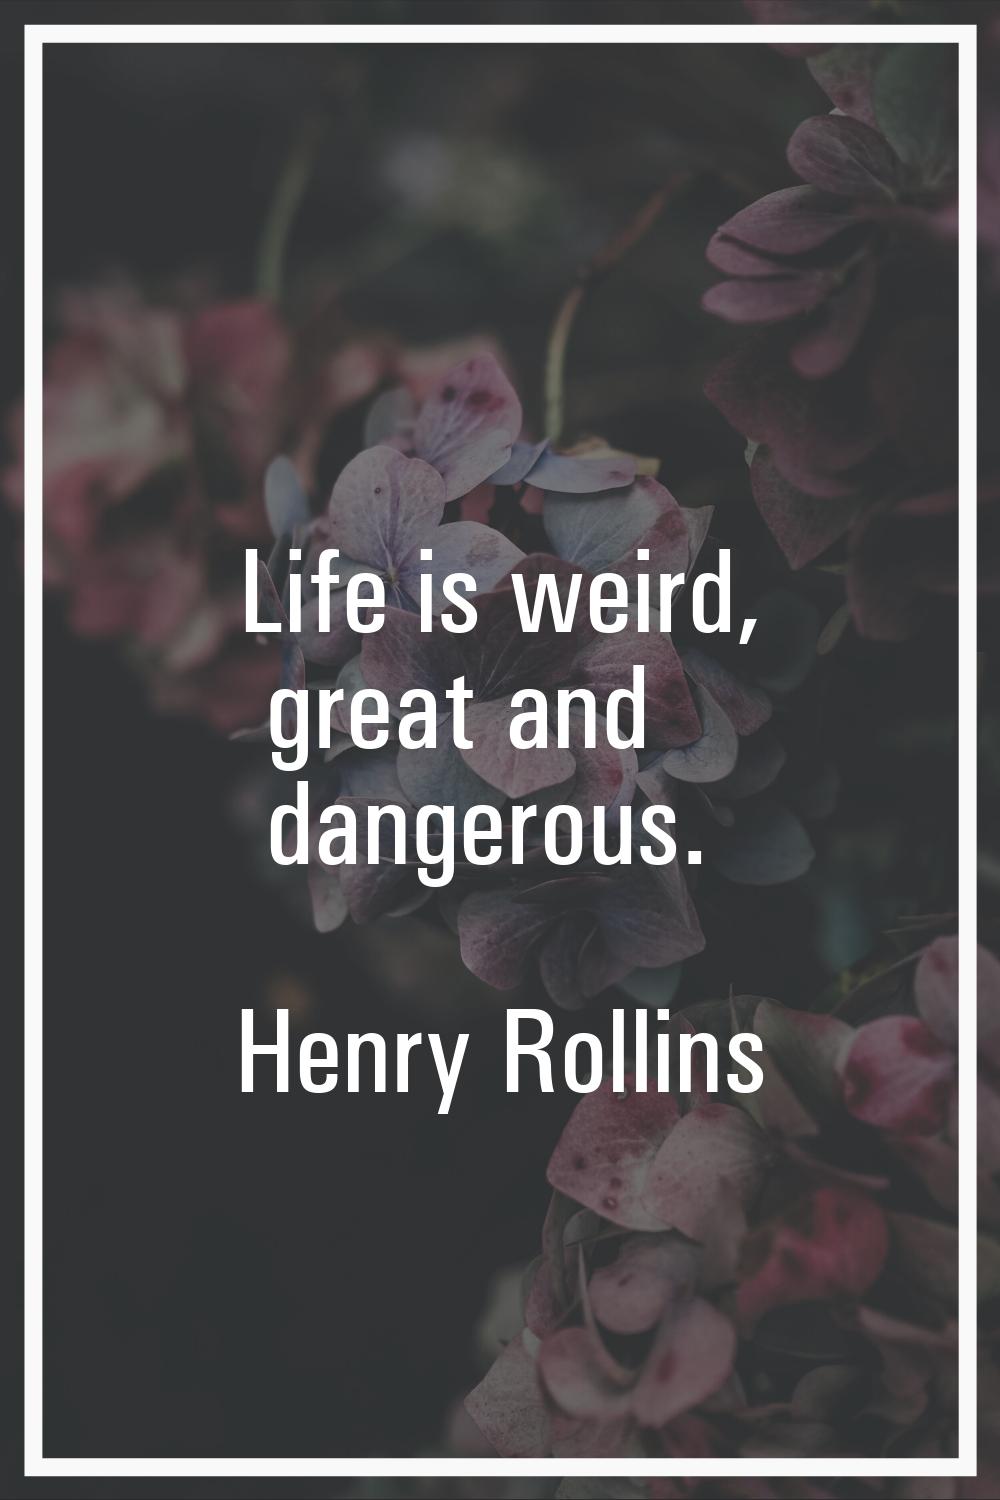 Life is weird, great and dangerous.